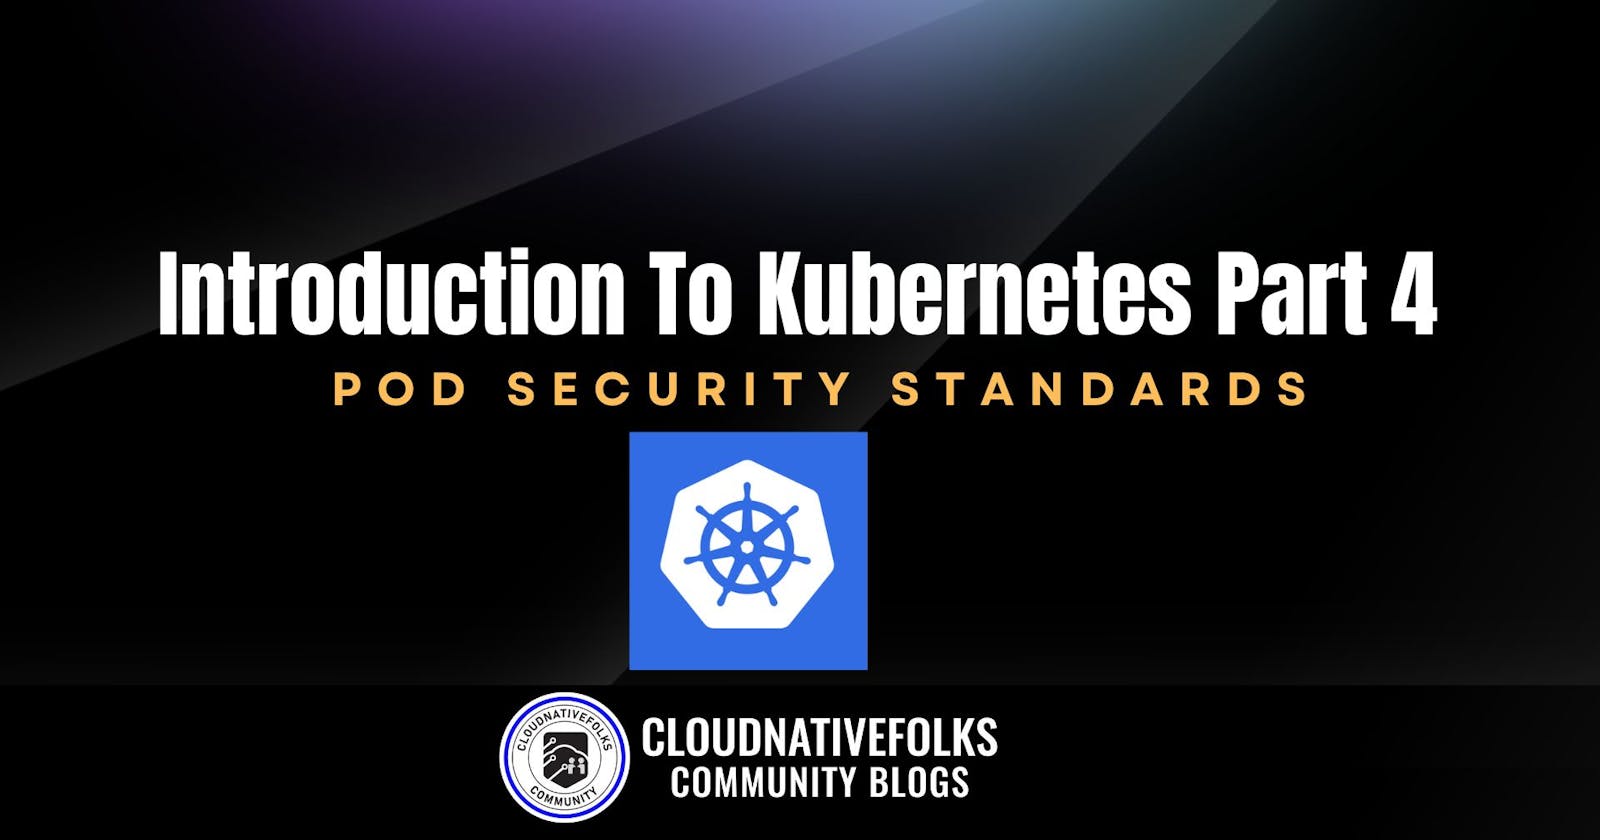 Introduction To Kubernetes Part 4 - Pod Security Standards